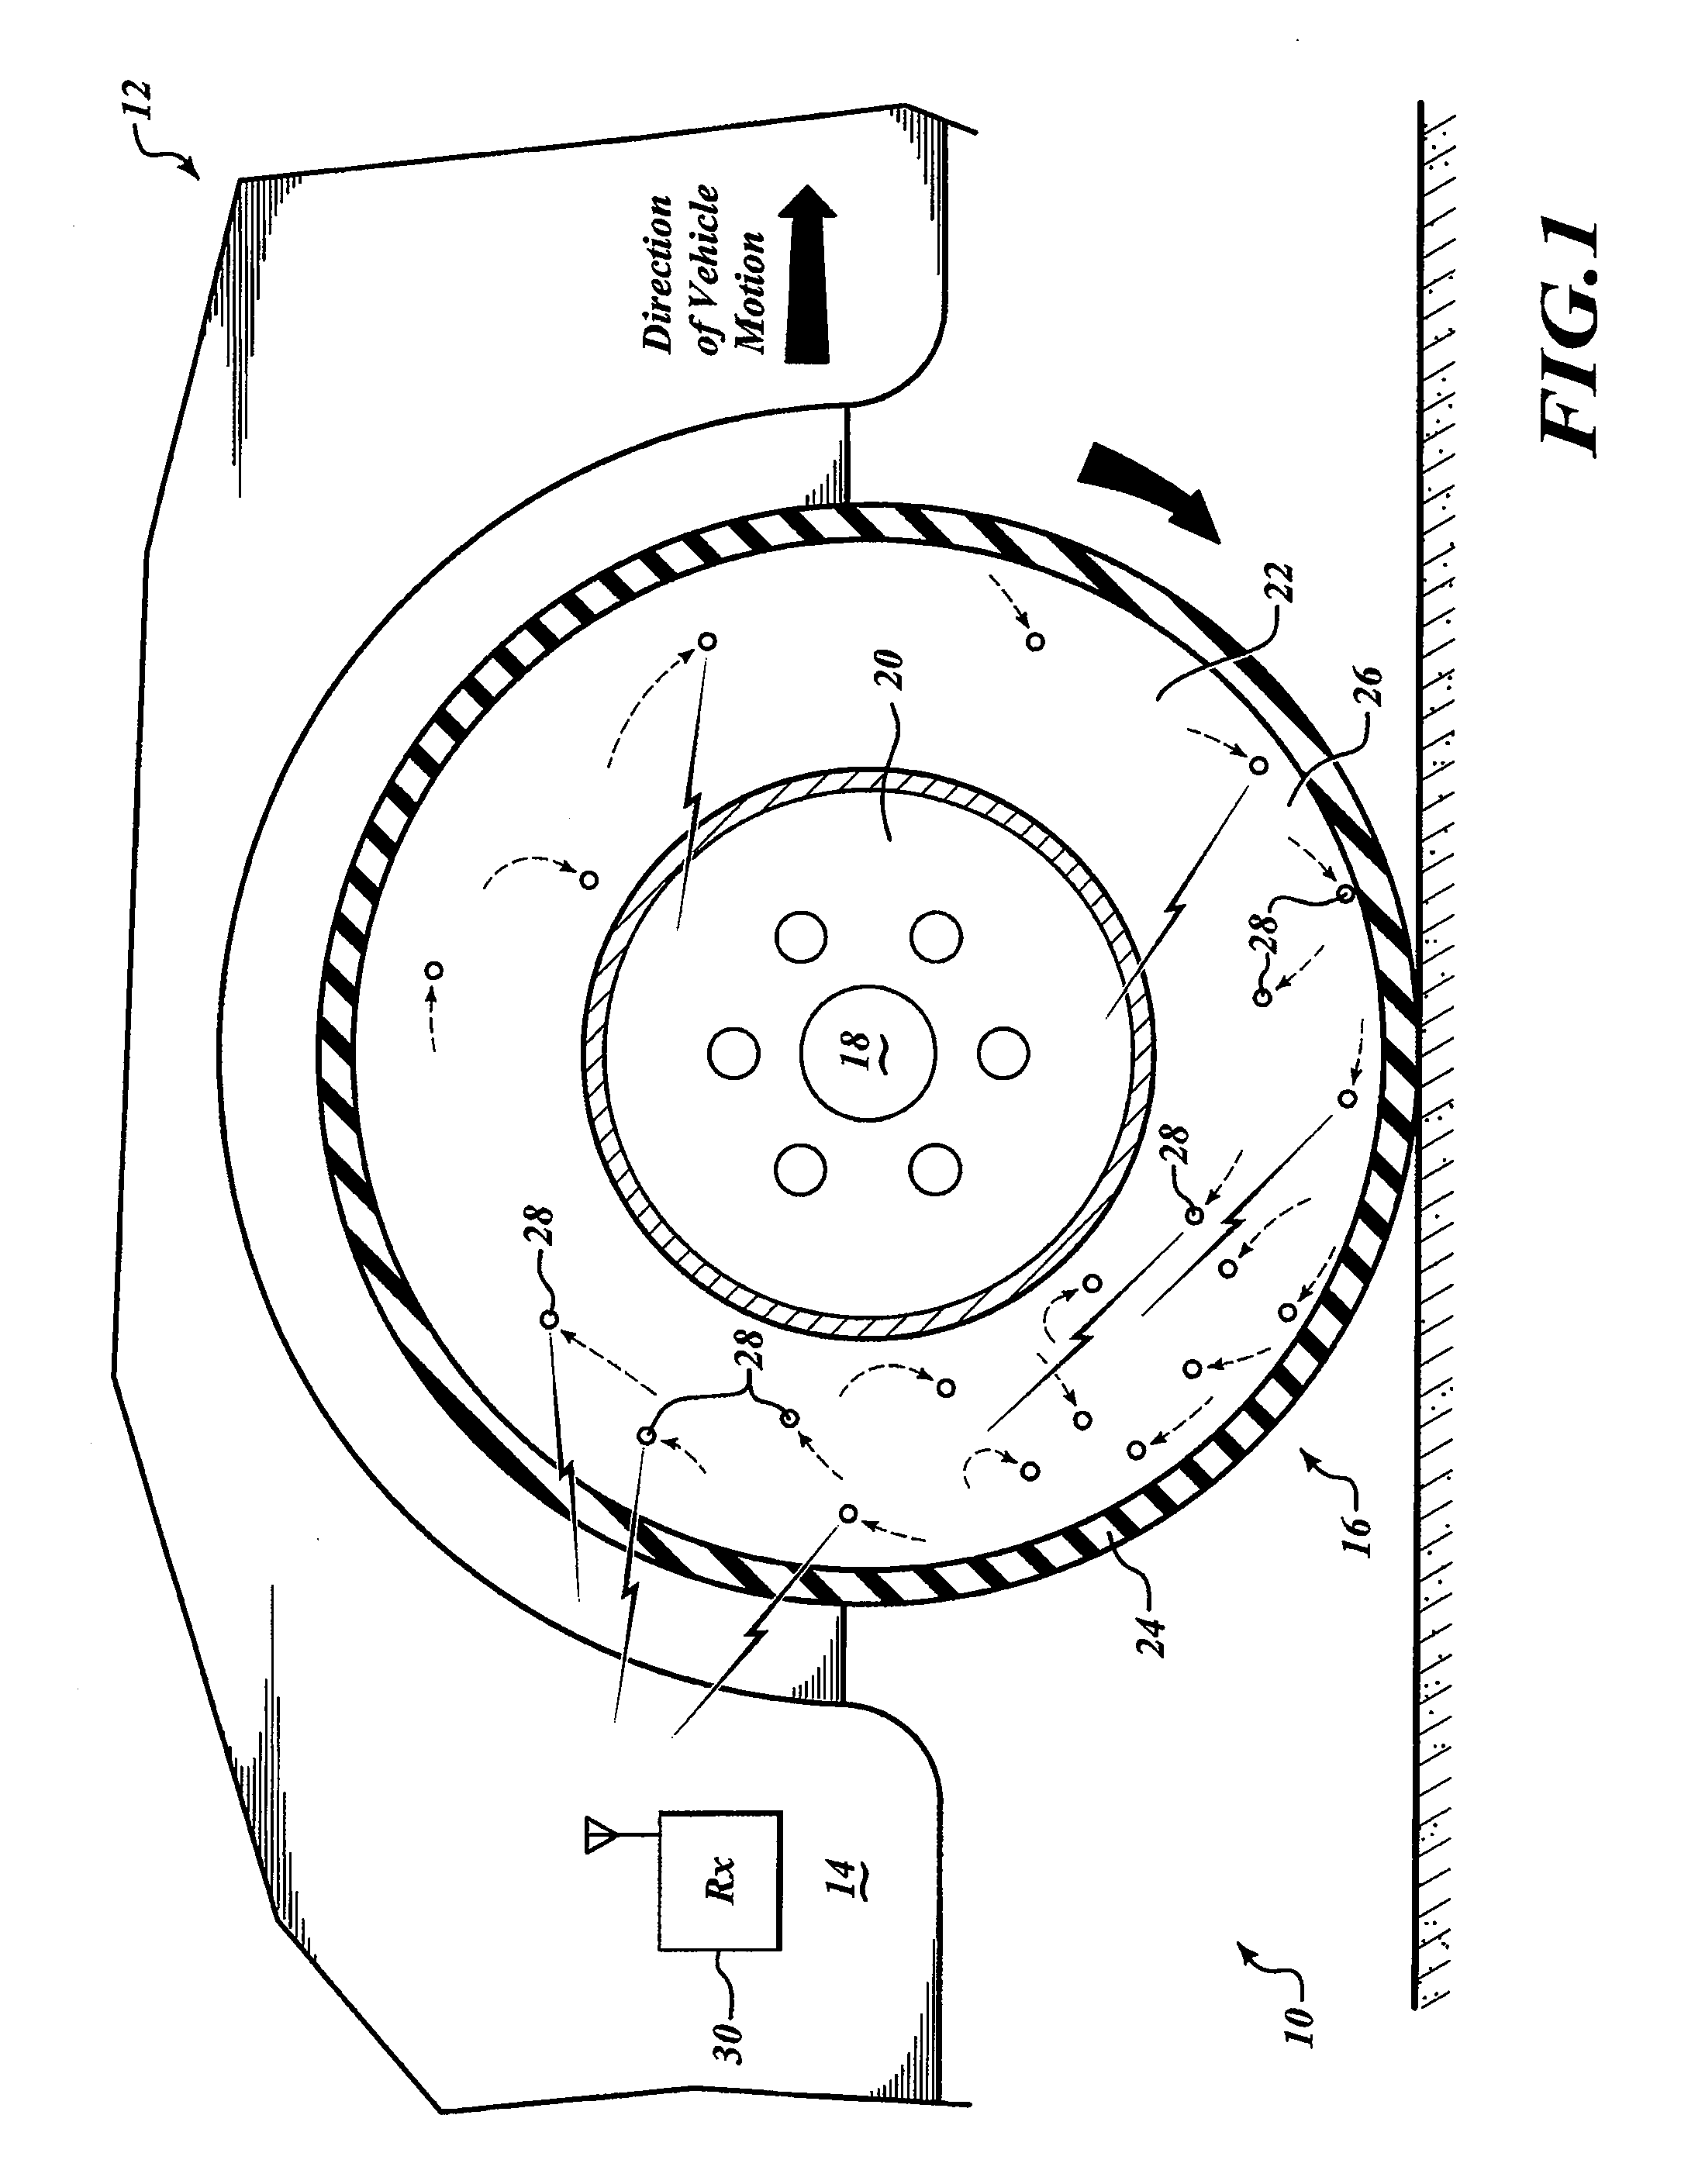 Self-powered sensor system for monitoring tire pressure